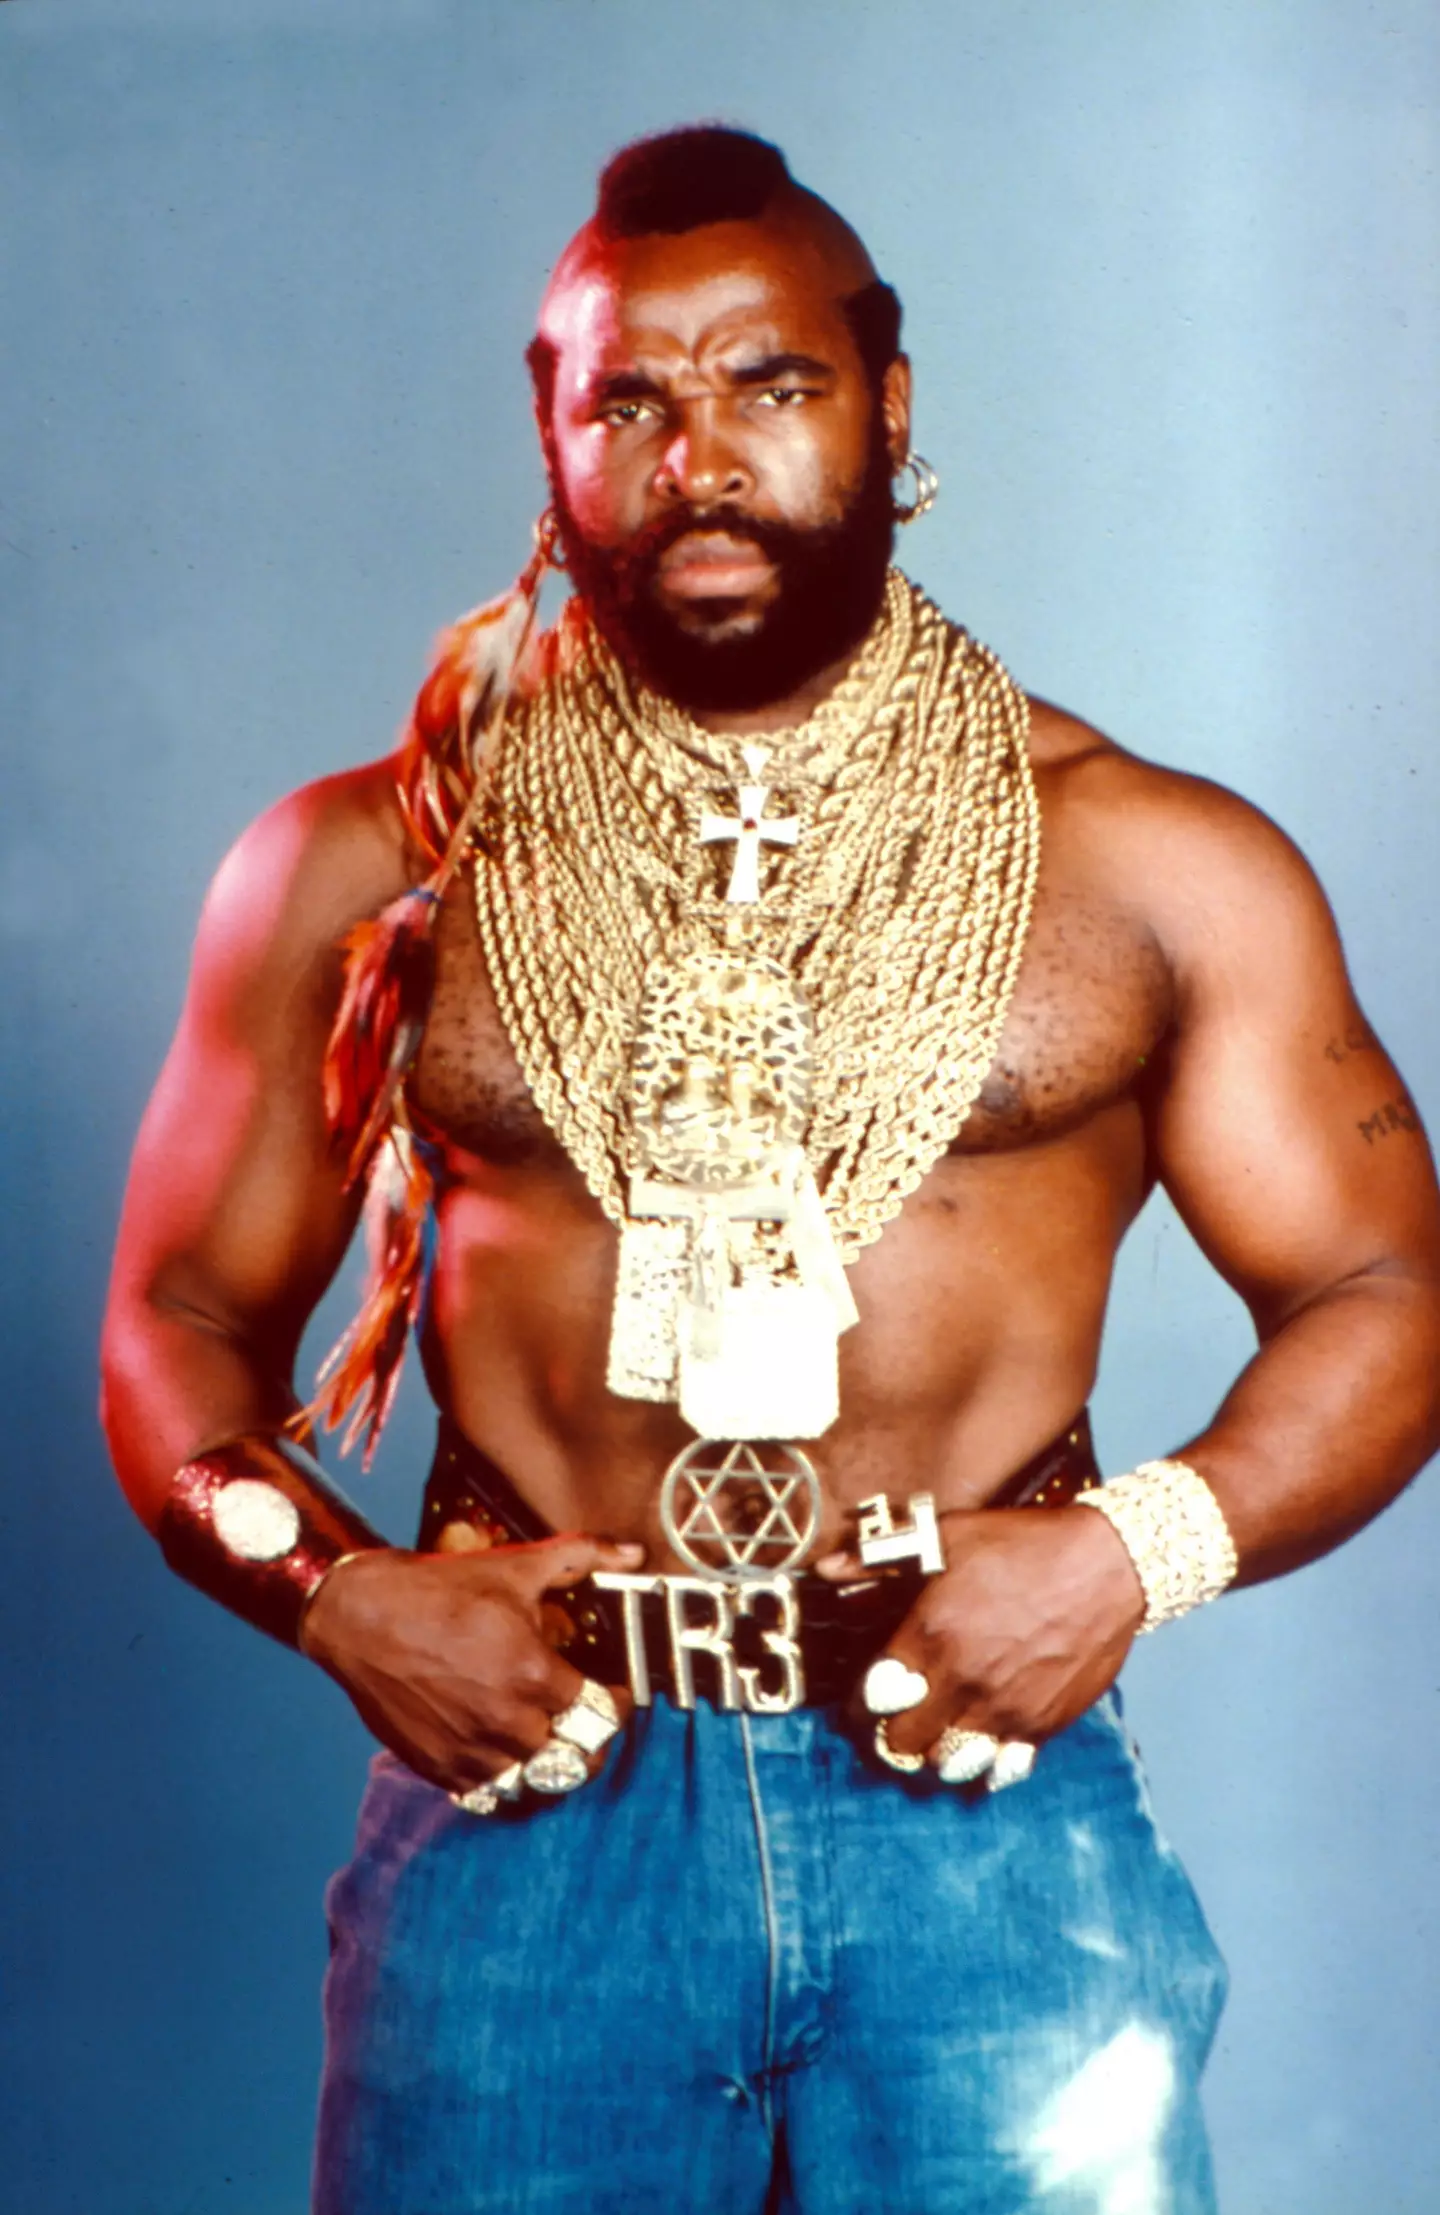 It apparently used to take Mr T an entire hour to put on all of his iconic gold chains.